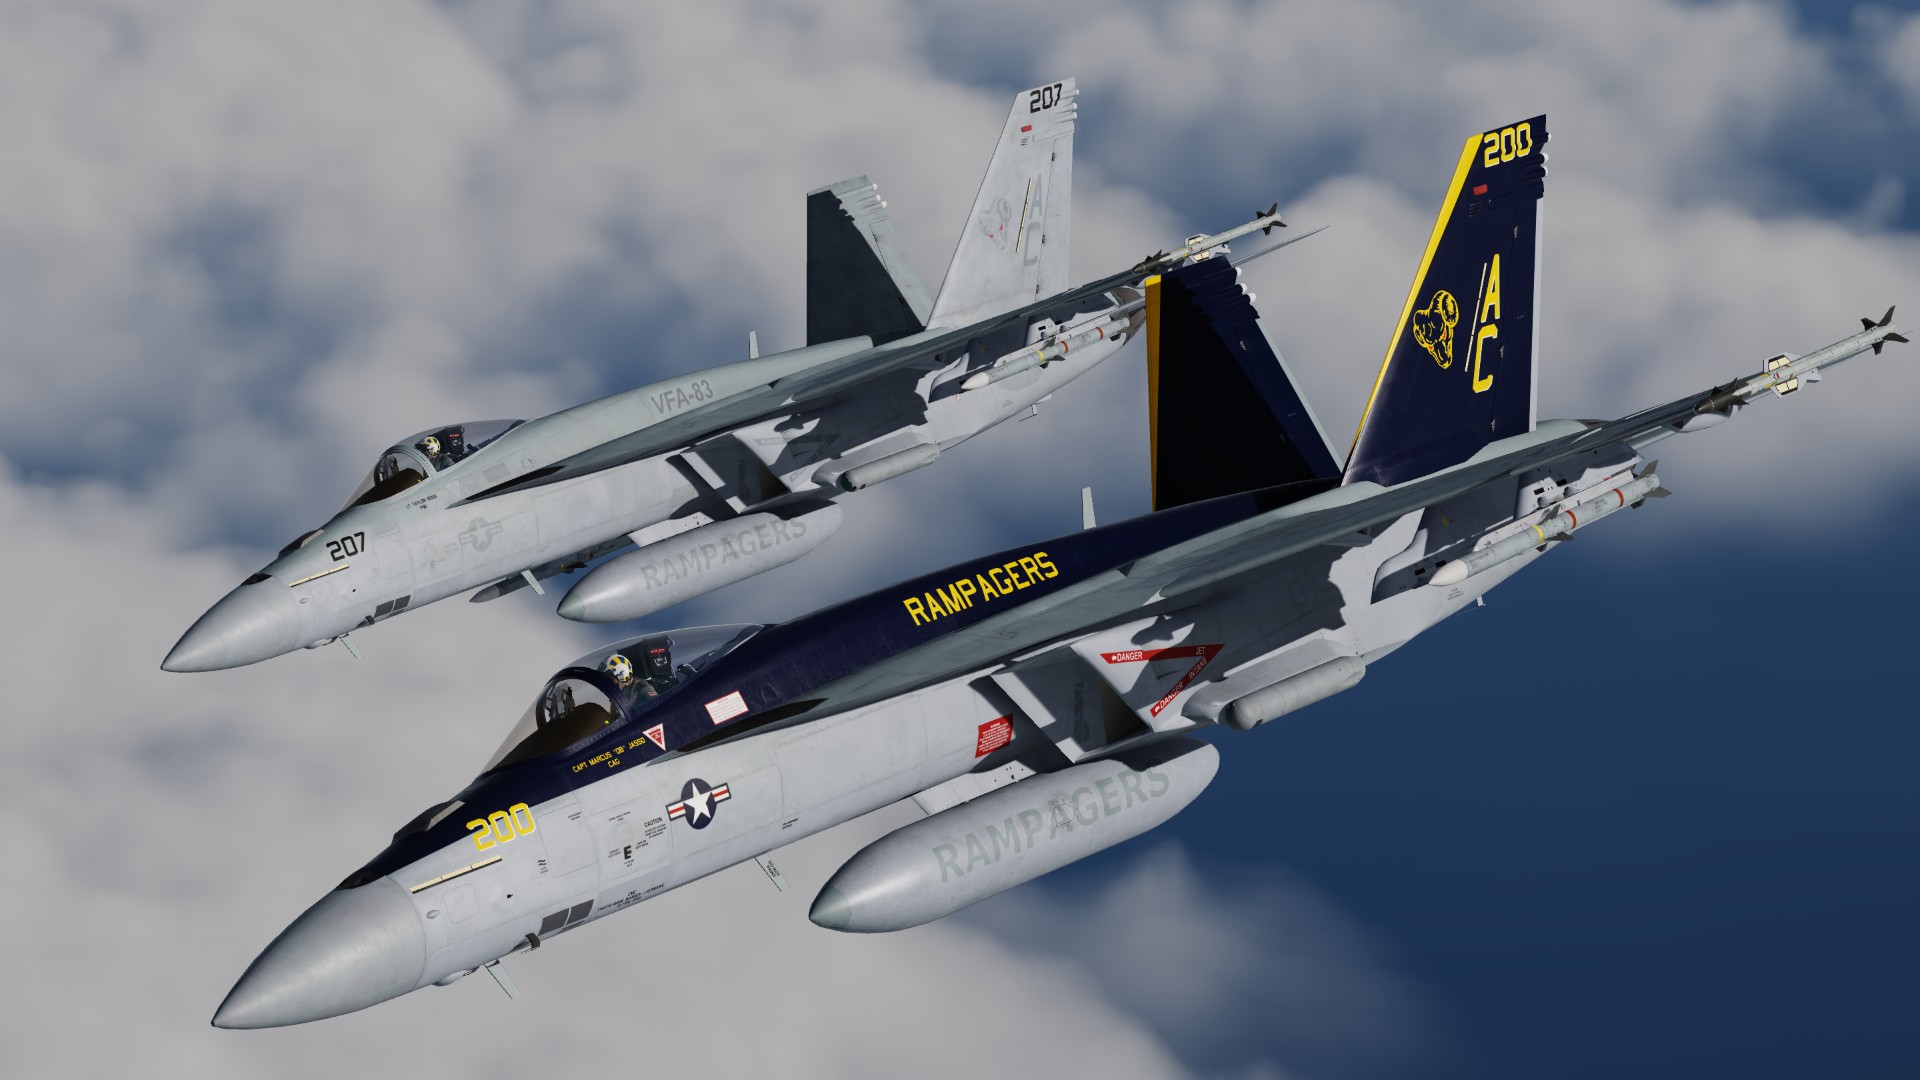 [FA-18E] VFA-83 Rampagers Pack (2022) for CJS Superbug Mod 